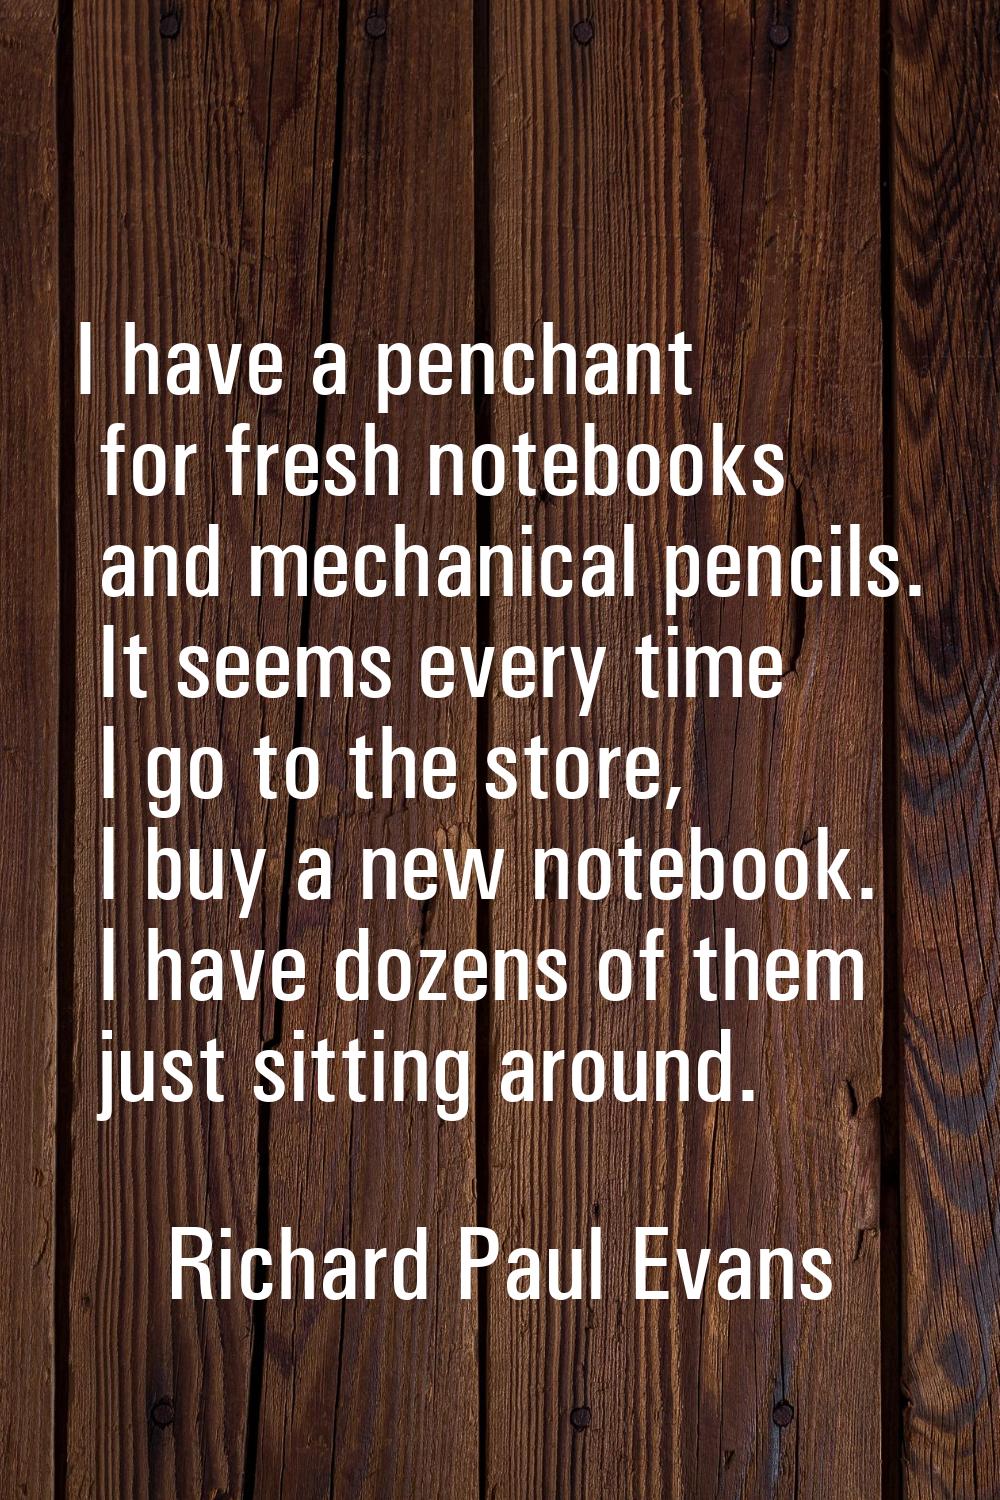 I have a penchant for fresh notebooks and mechanical pencils. It seems every time I go to the store